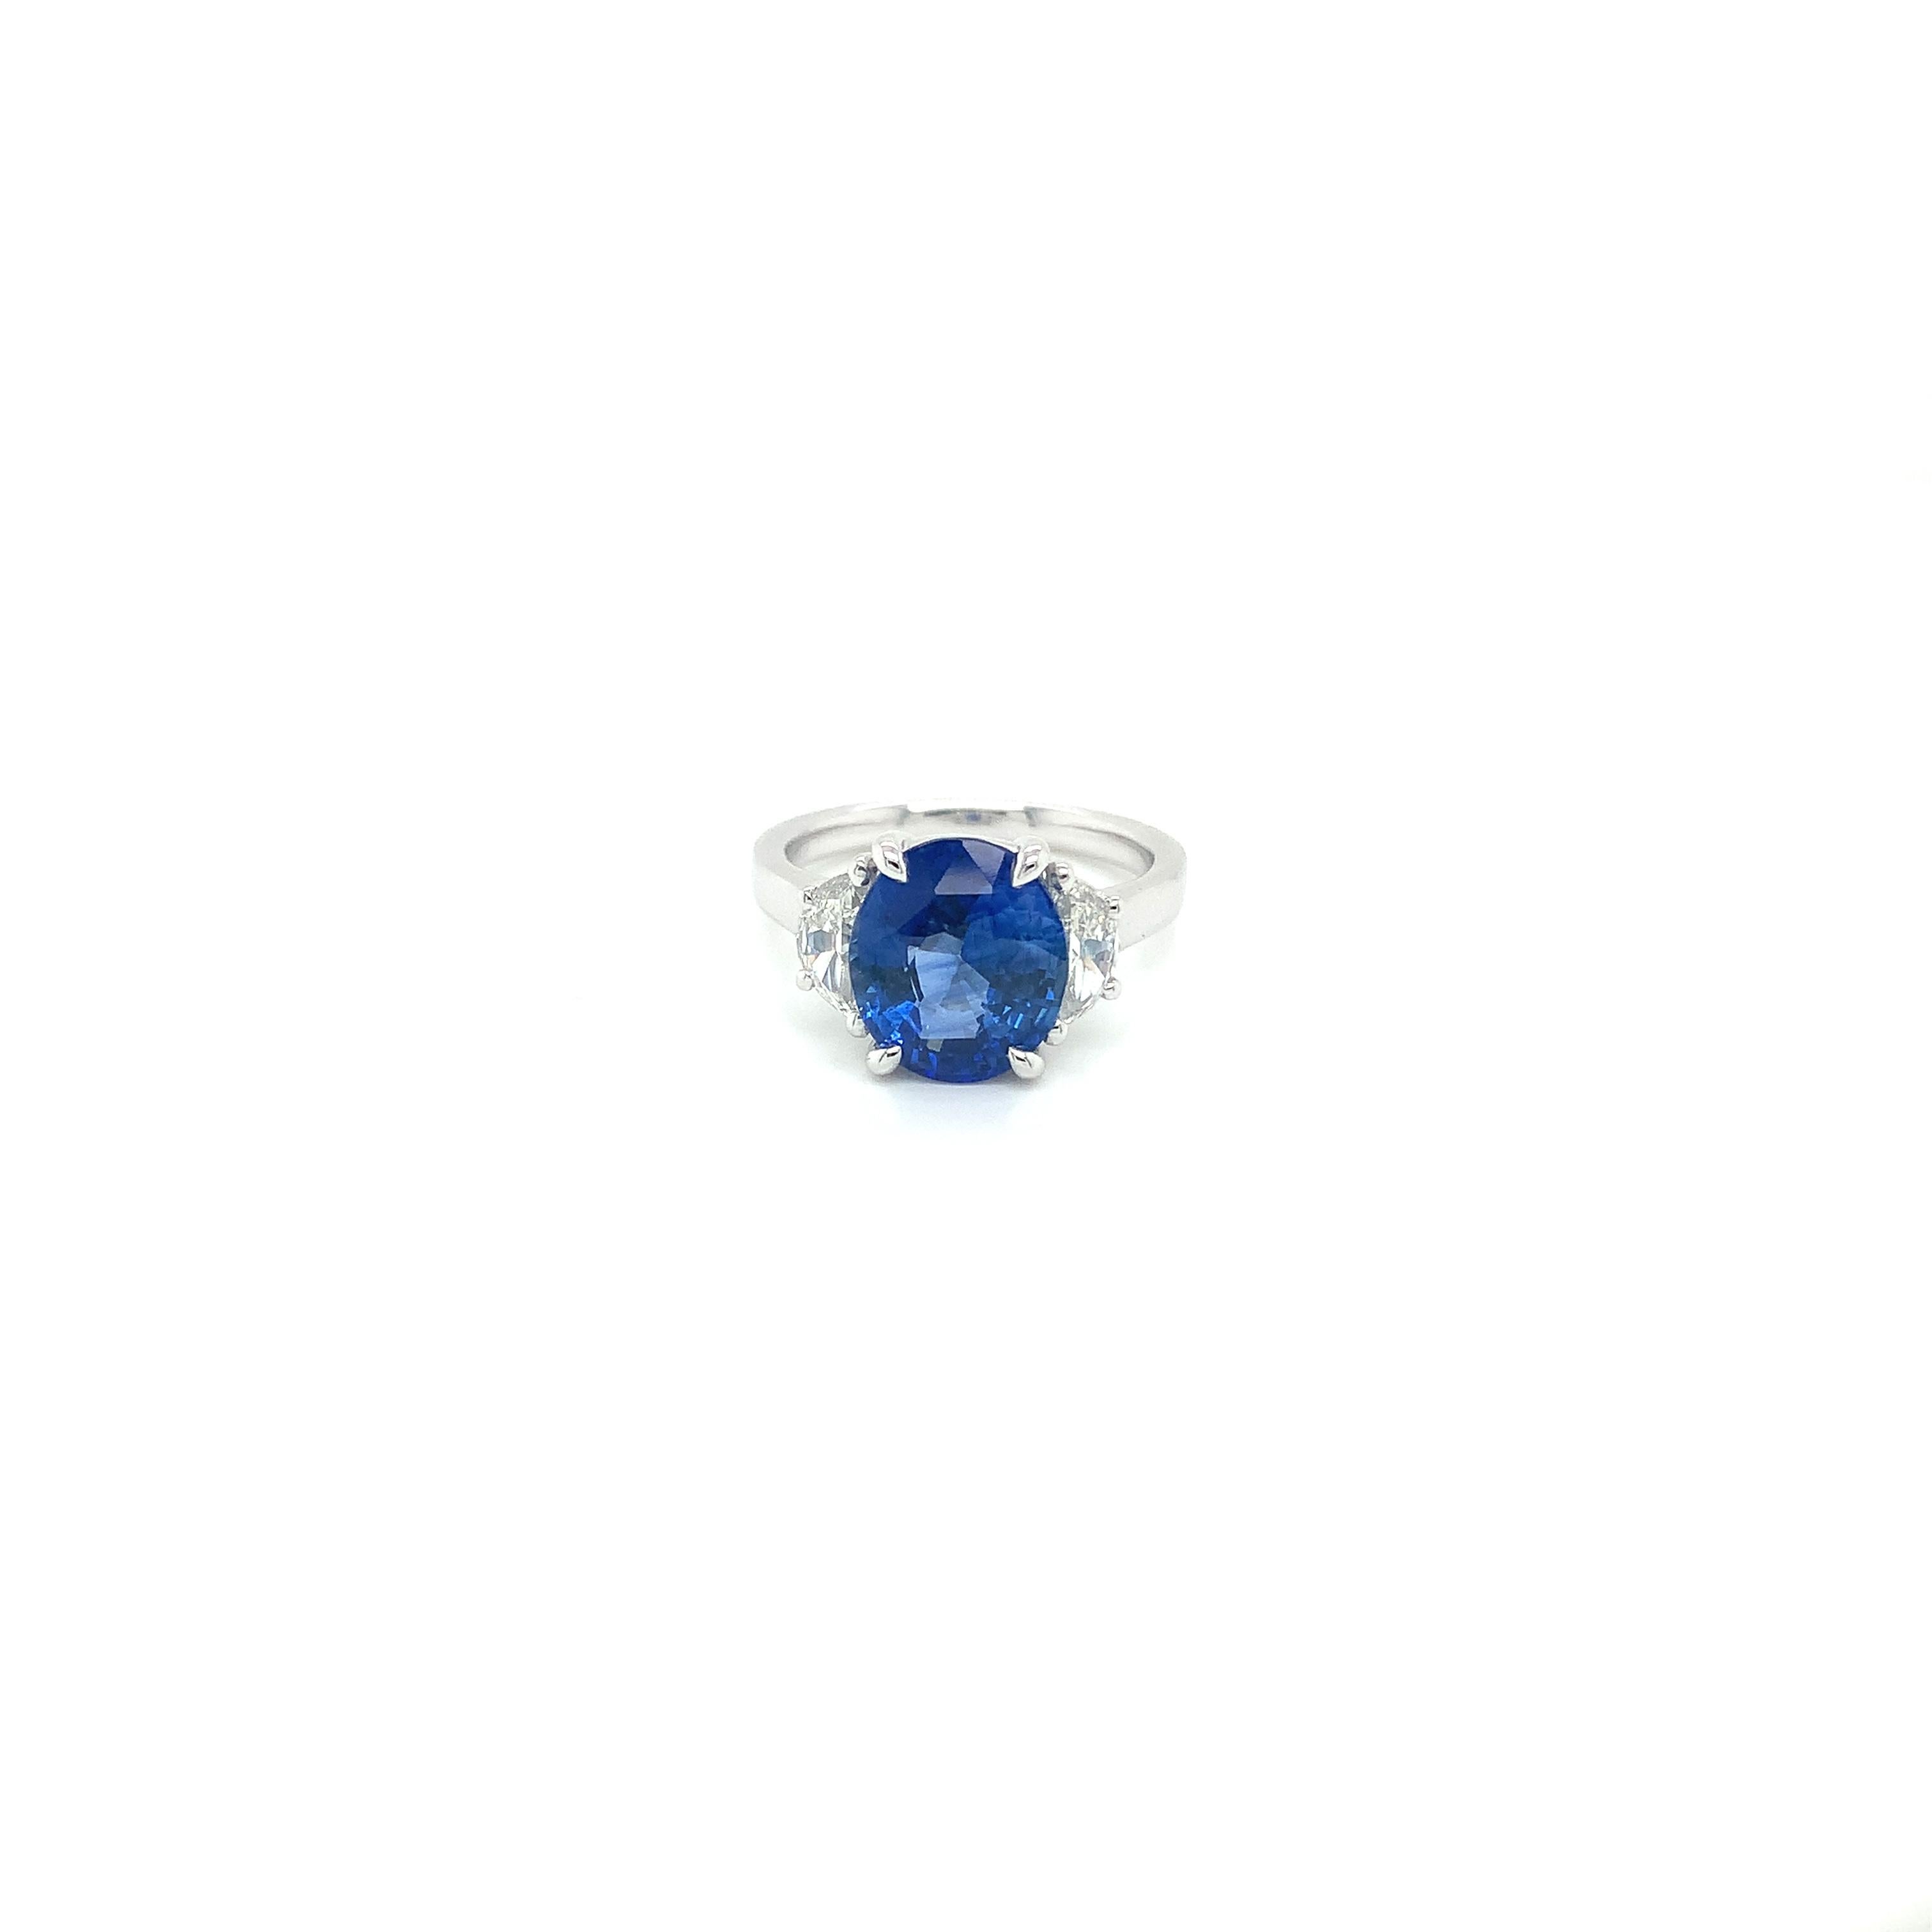 Oval blue sapphire weighing 4.24 cts
Measuring (10.7x9.3) mm
Two Diamonds weighing .77 cts
Measuring (6.8x3.4) mm
Set in Platinum Ring
8.31 grams